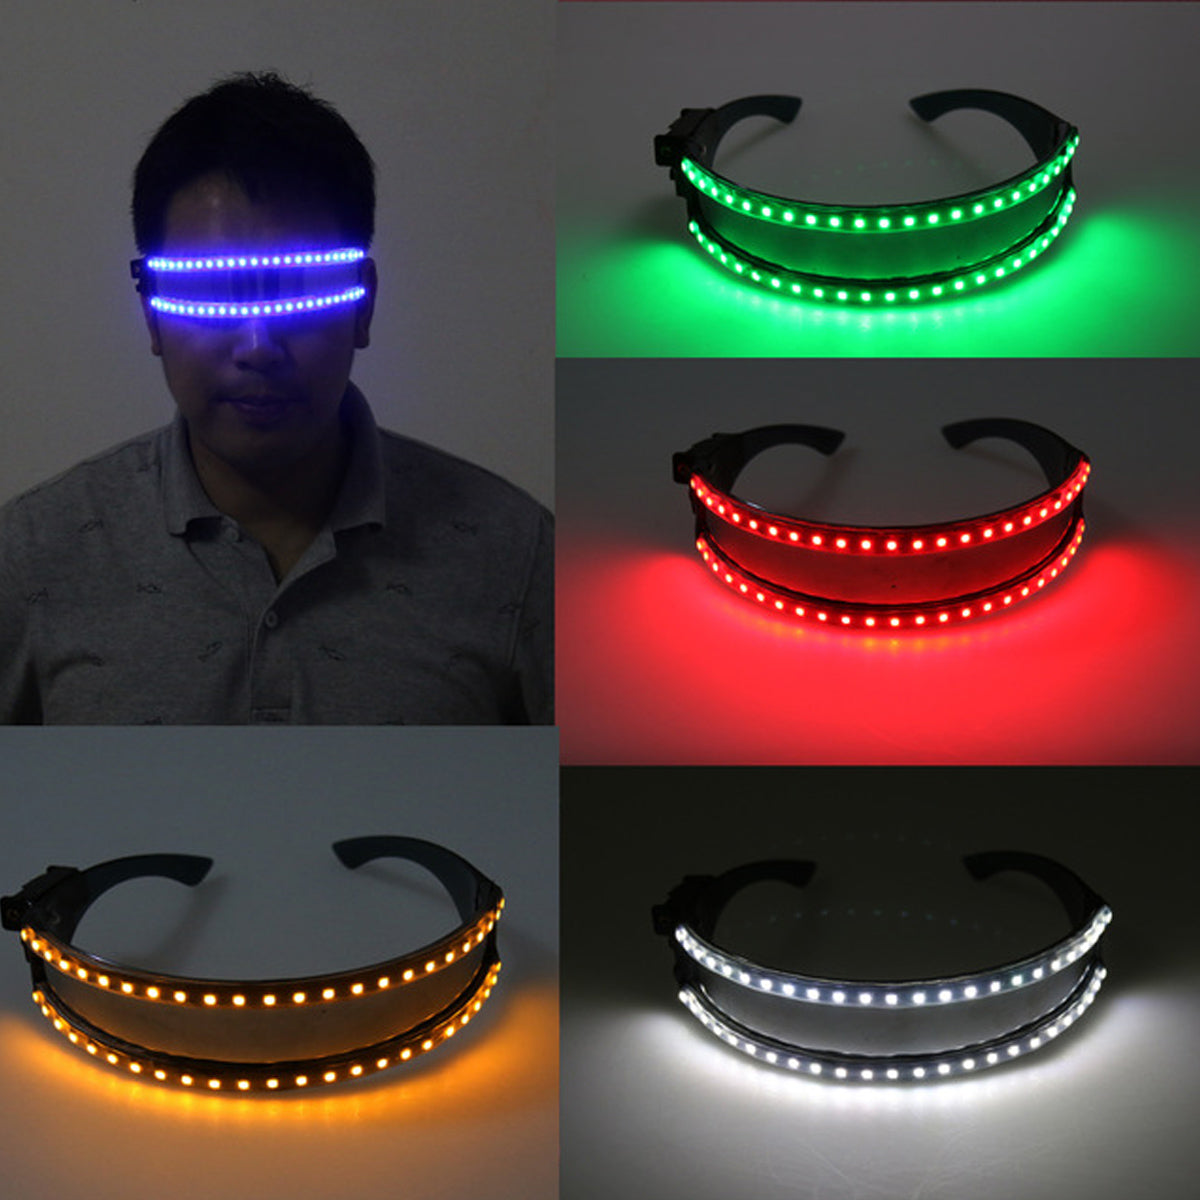 Tomato LED Motorcycle Glasses Cosplay Holiday Decoration Halloween Gift Festival Nightclub Stage Props